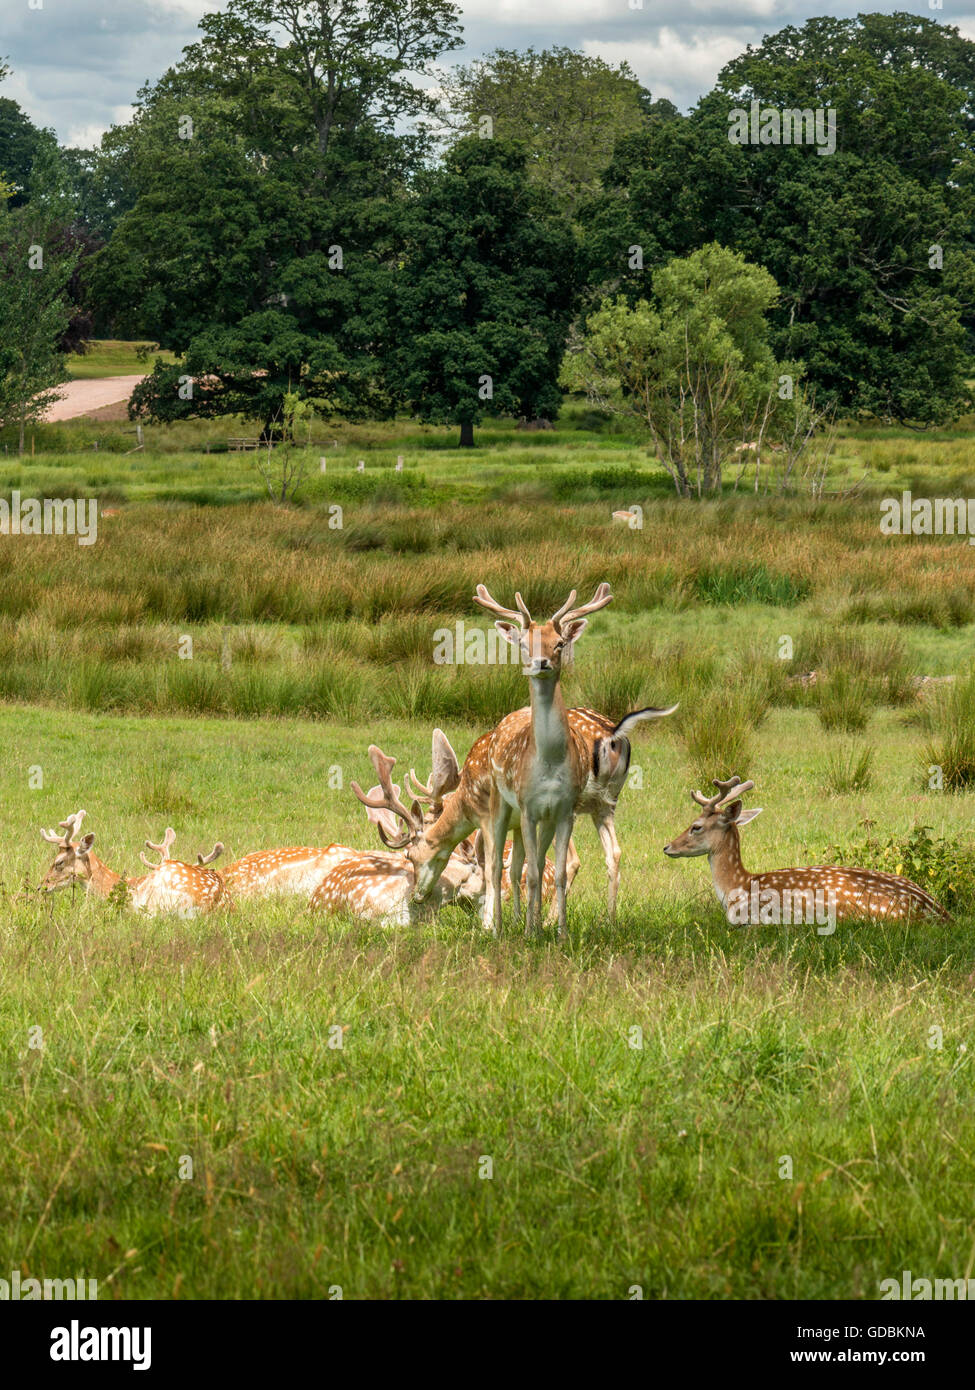 Herd of Fallow Deer (Dama dama), grazing, relaxing and keeping cool in the shade during the July 2016 British, mini heatwave. Stock Photo